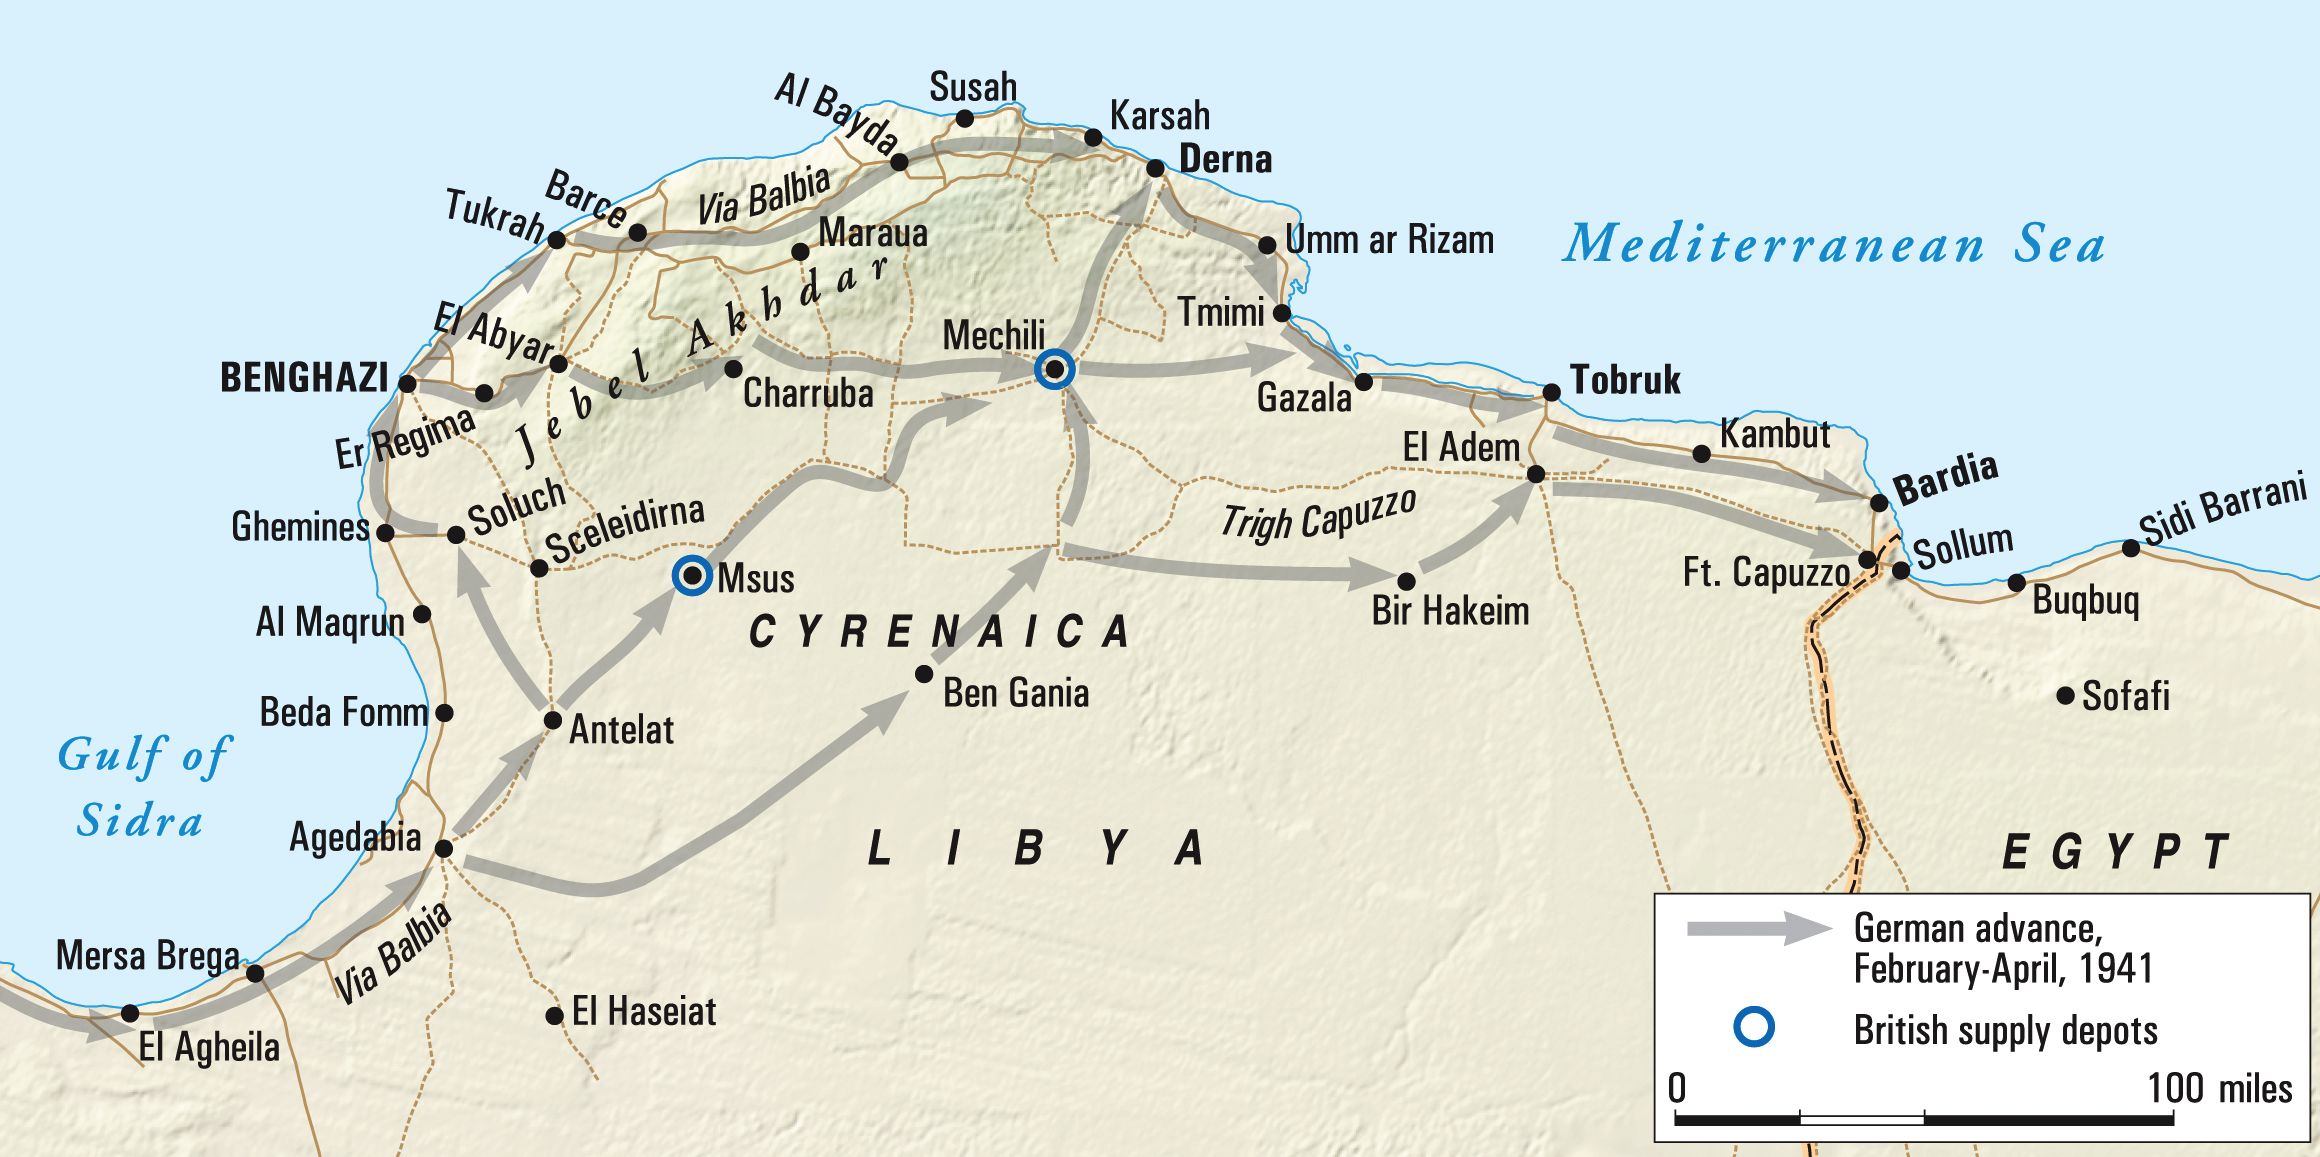 Rommel arrived in Tripoli on February 12, and by March 24 his Afrika Korps had captured El Agheila and was pushing hard into Cyrenaica toward Benghazi and Mechili.  By April 10 elements of the Afrika Korps arrived outside Tobruk and were ordered to attack.